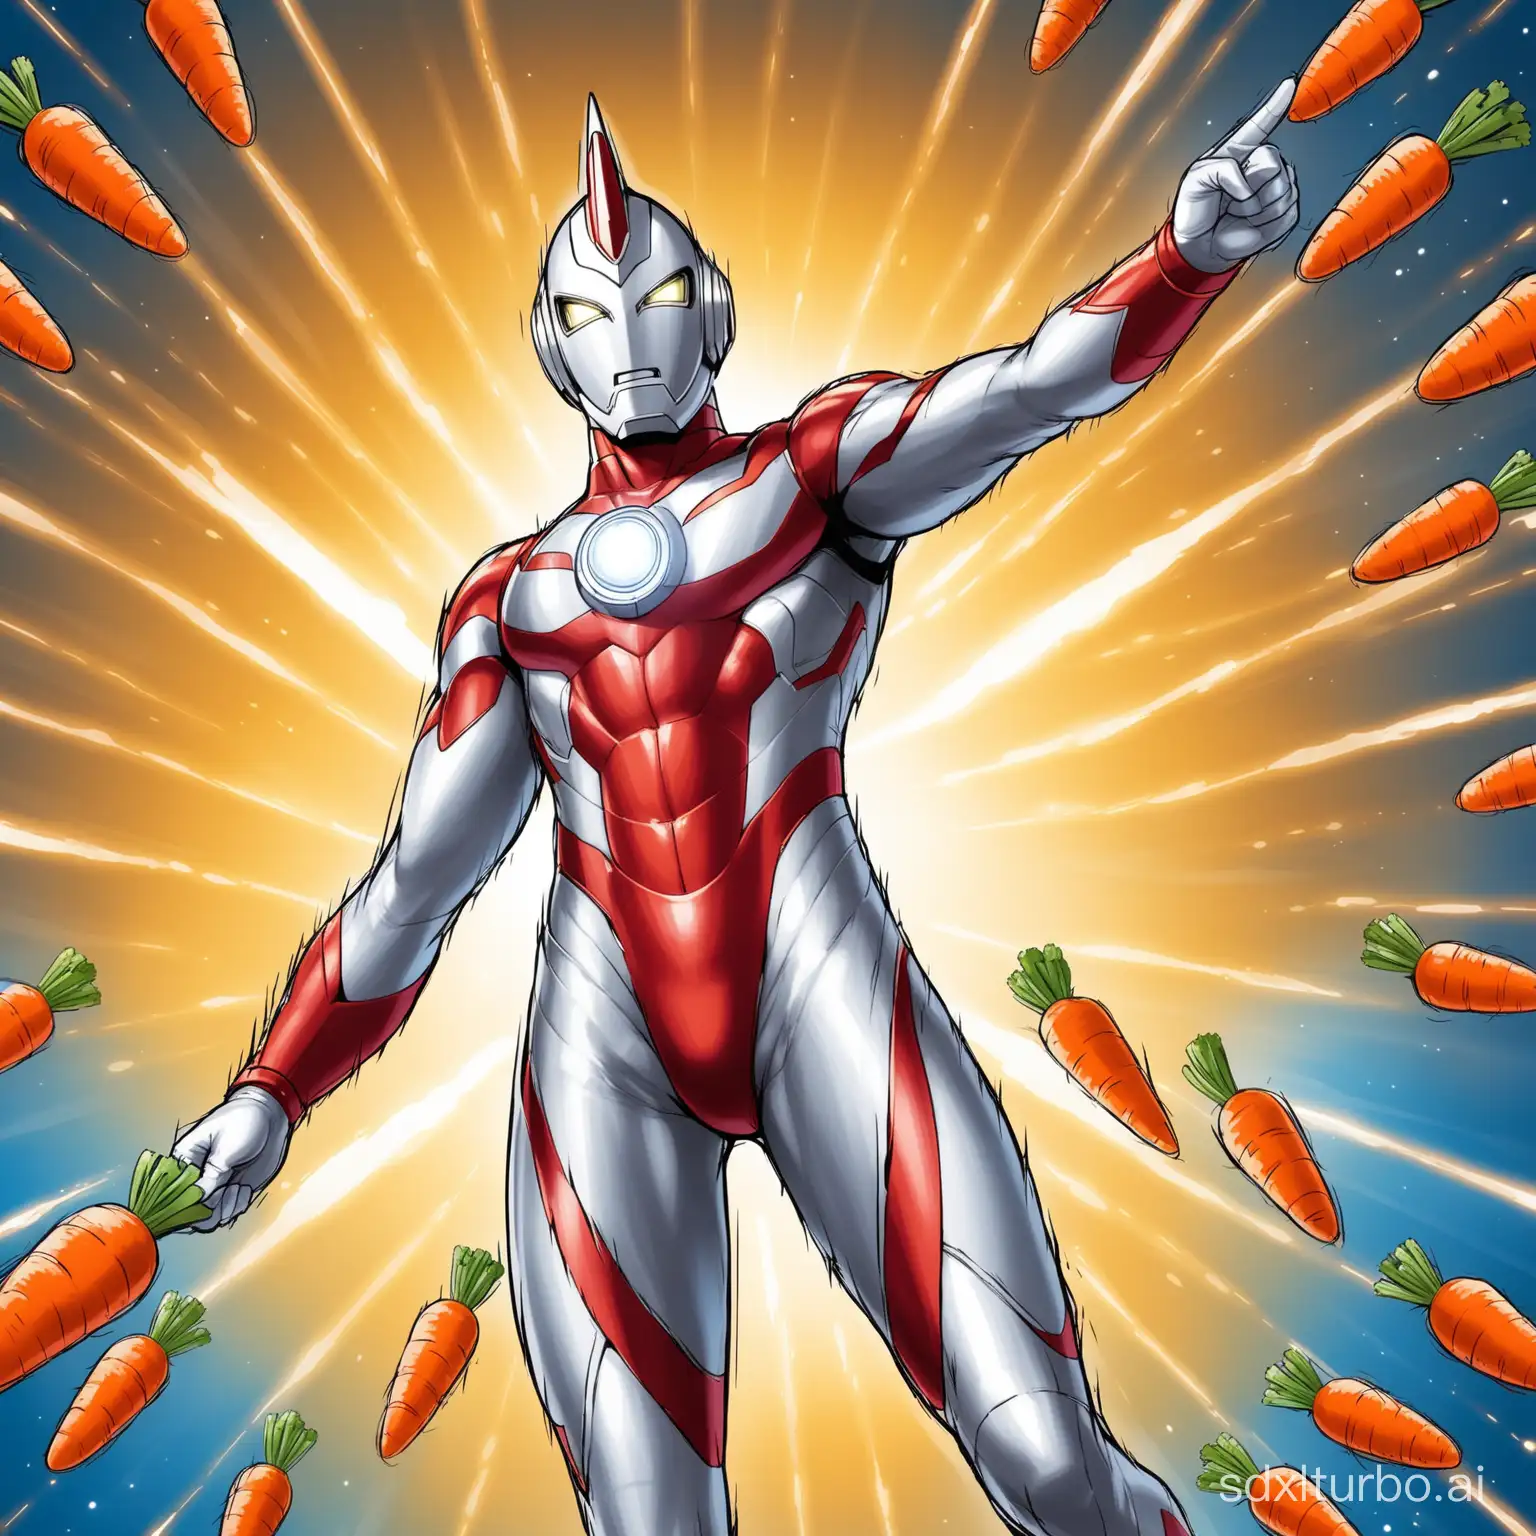 Ultraman-with-Carrots-Heroic-Figure-Embraces-Nutritious-Harvest